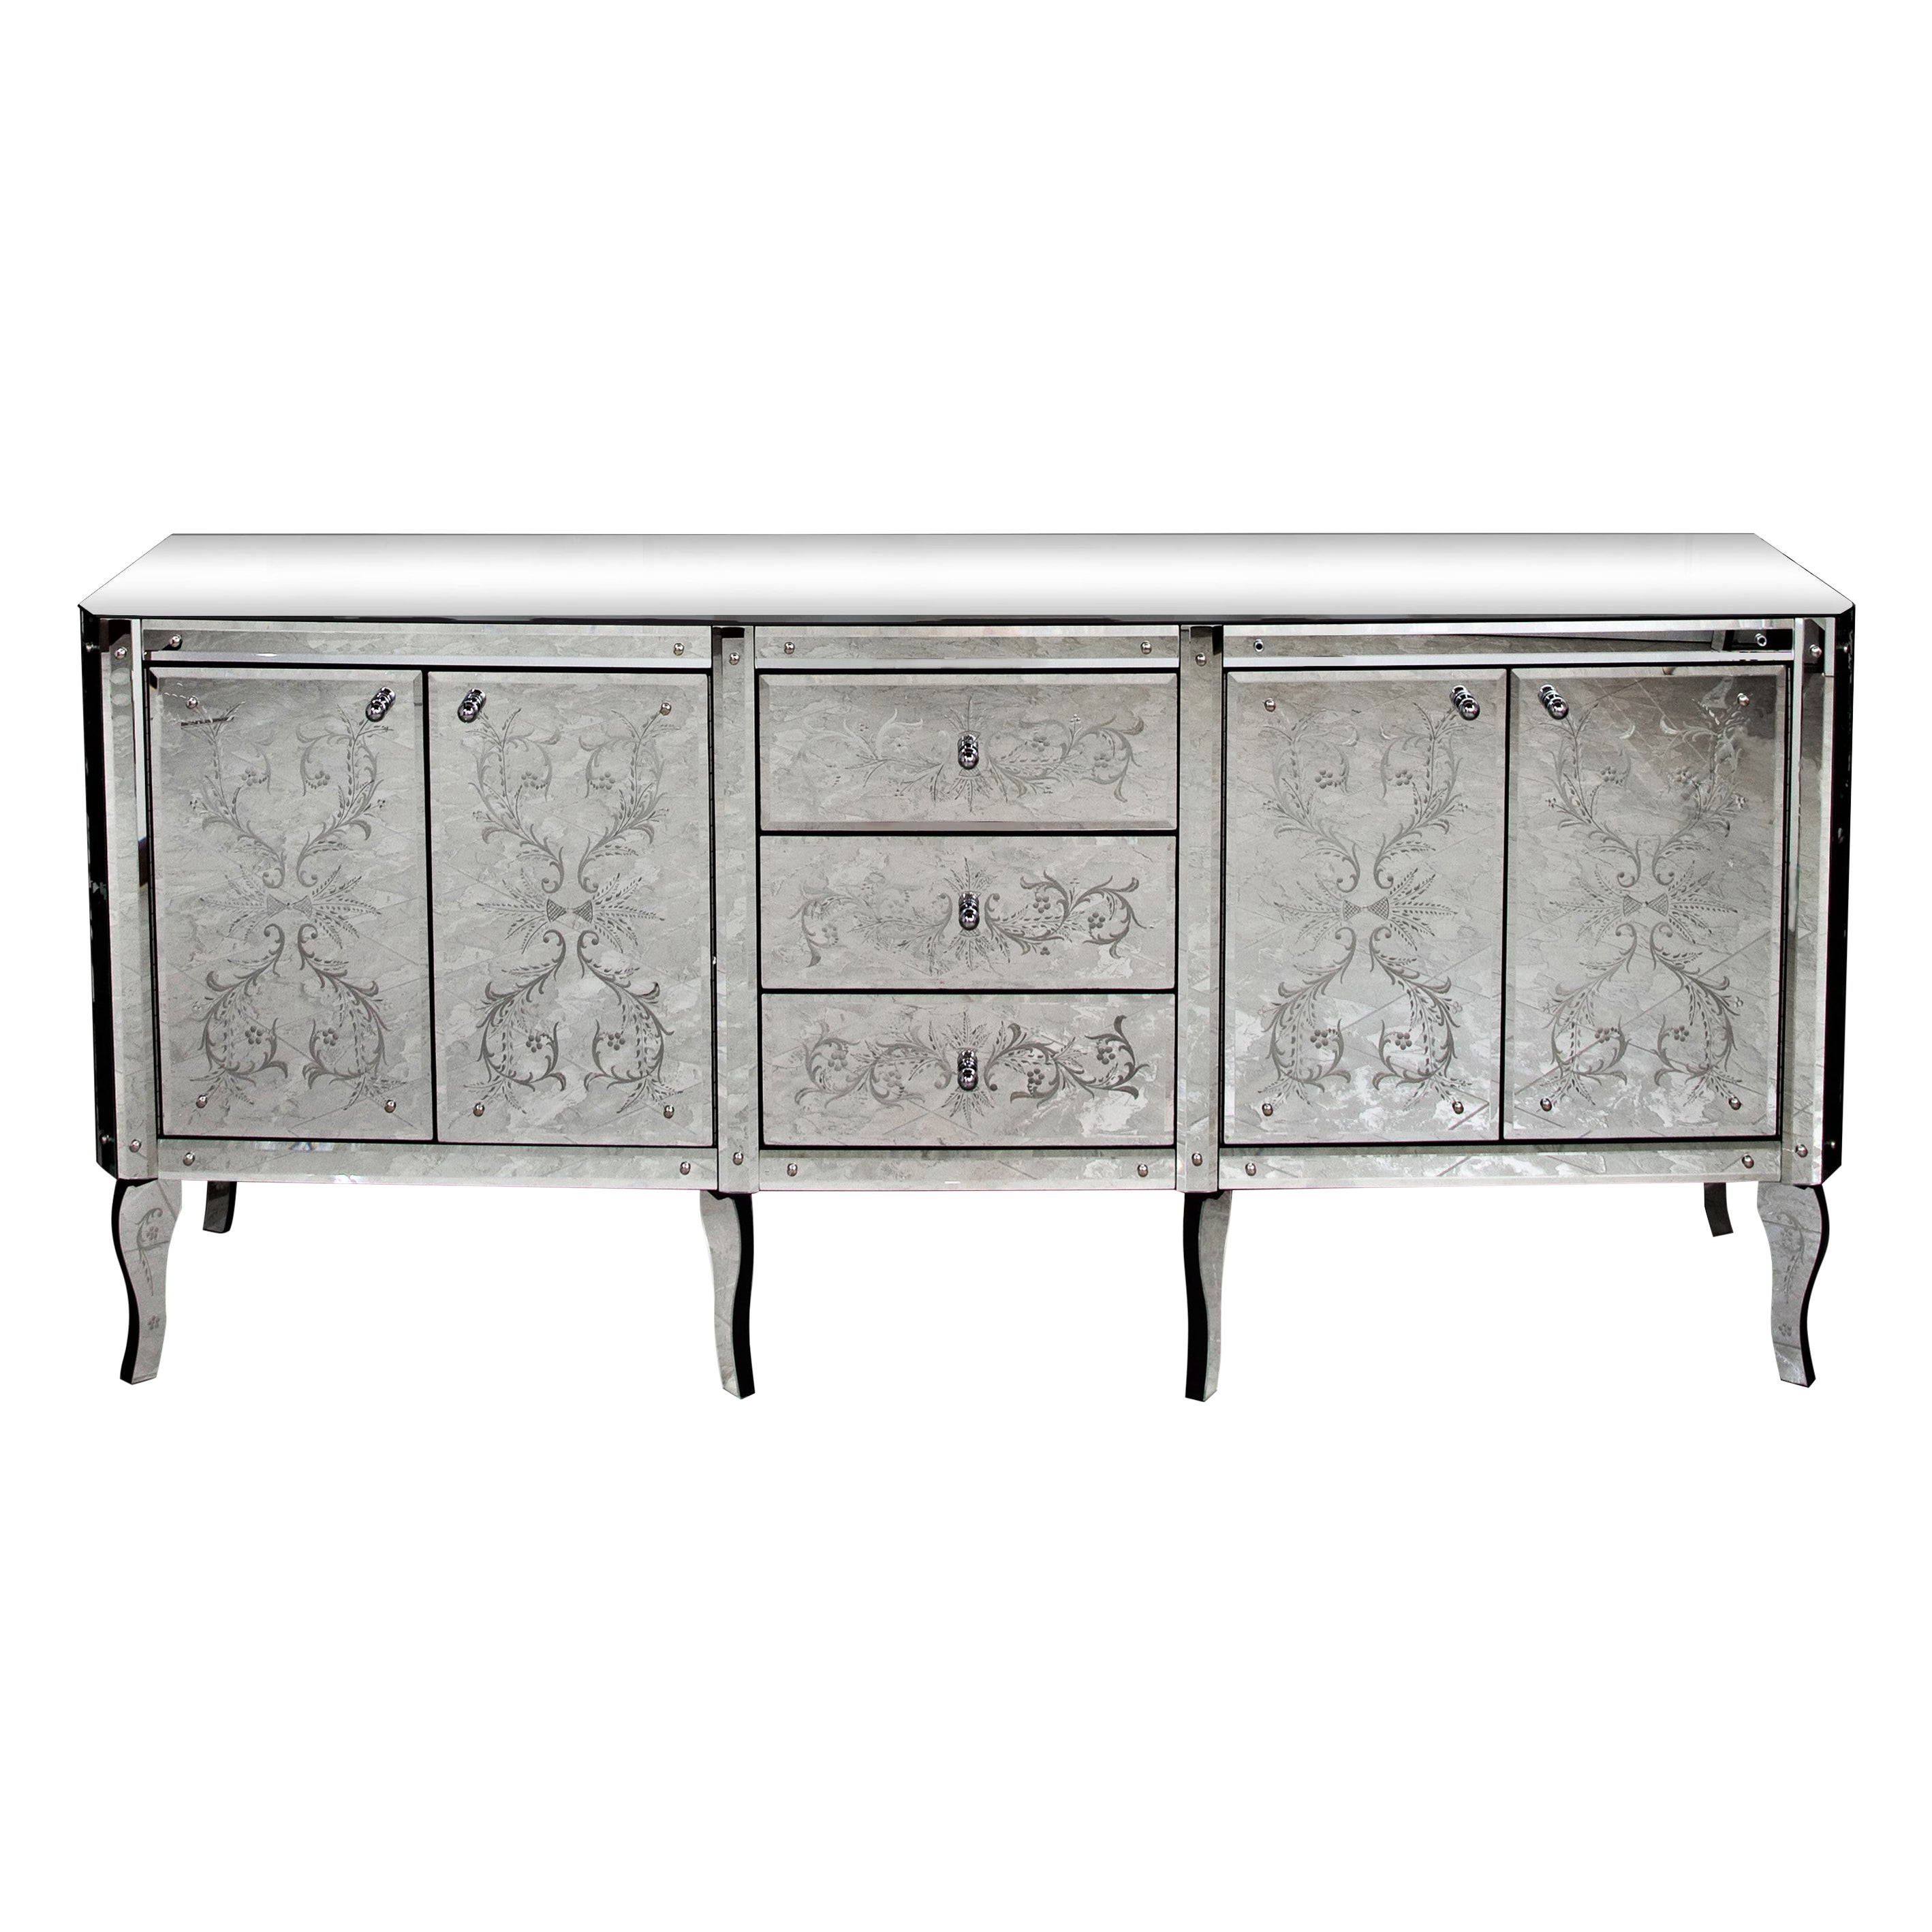 "Ca' Corner" Luxurious Sideboard in Murano Glass Mirror by Fratelli Tosi